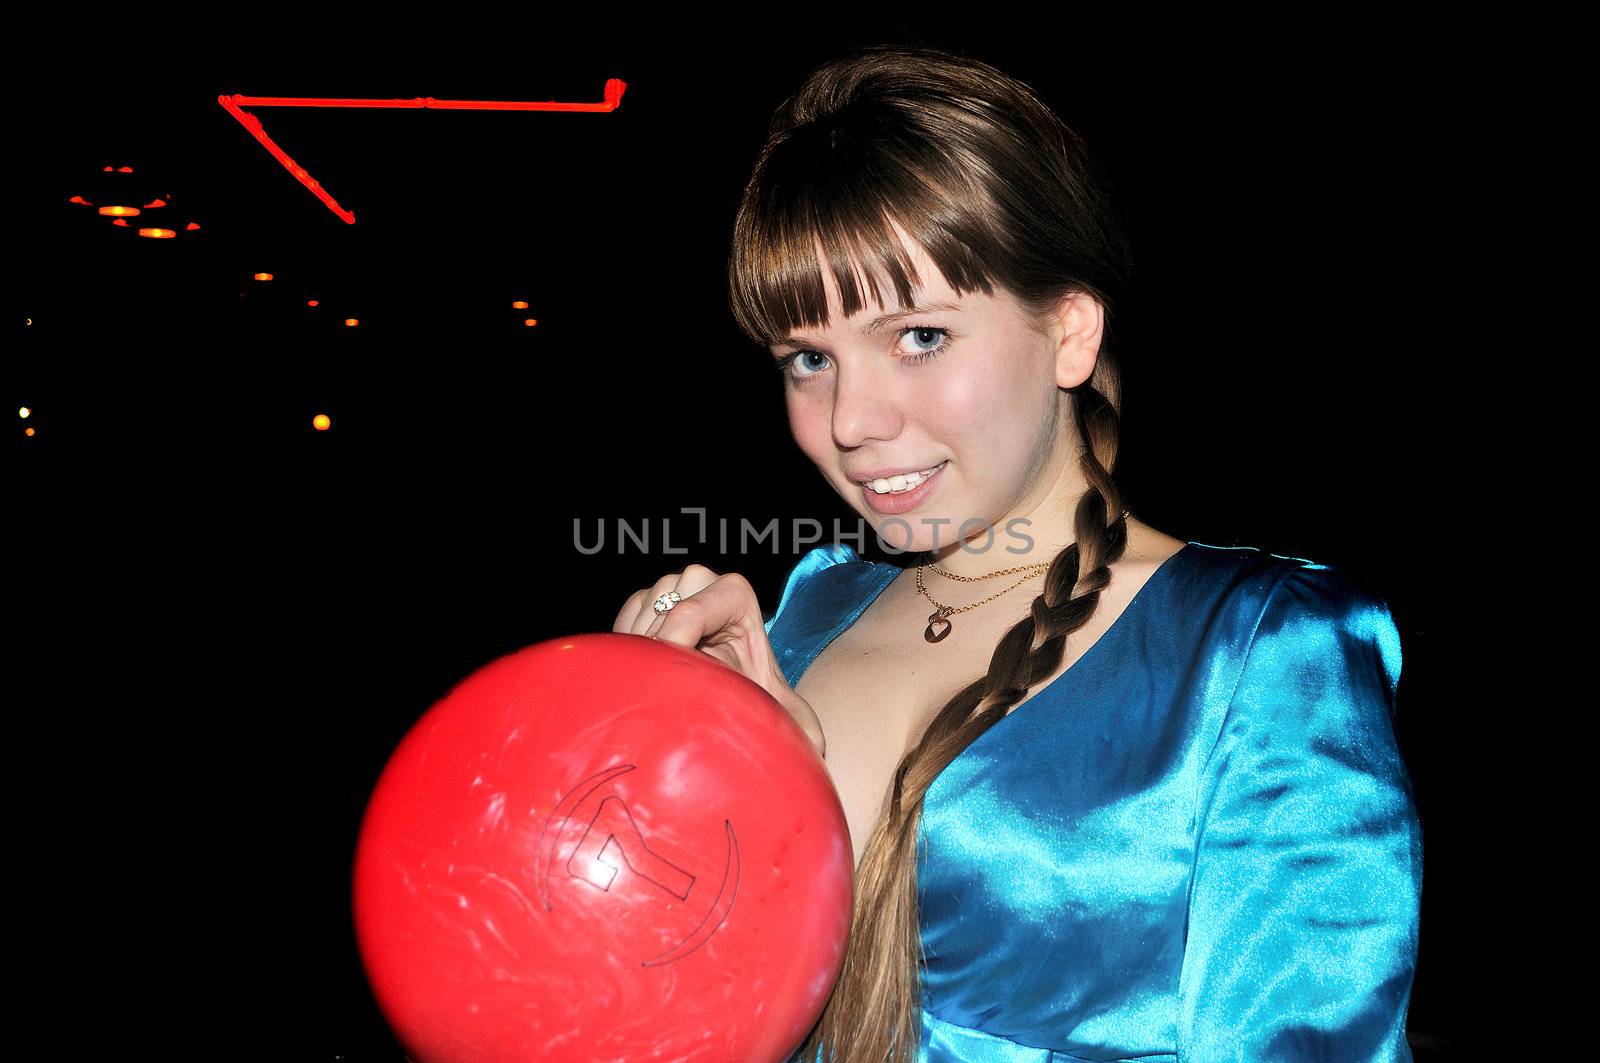 pretty Girl With Bowling Ball by Reana